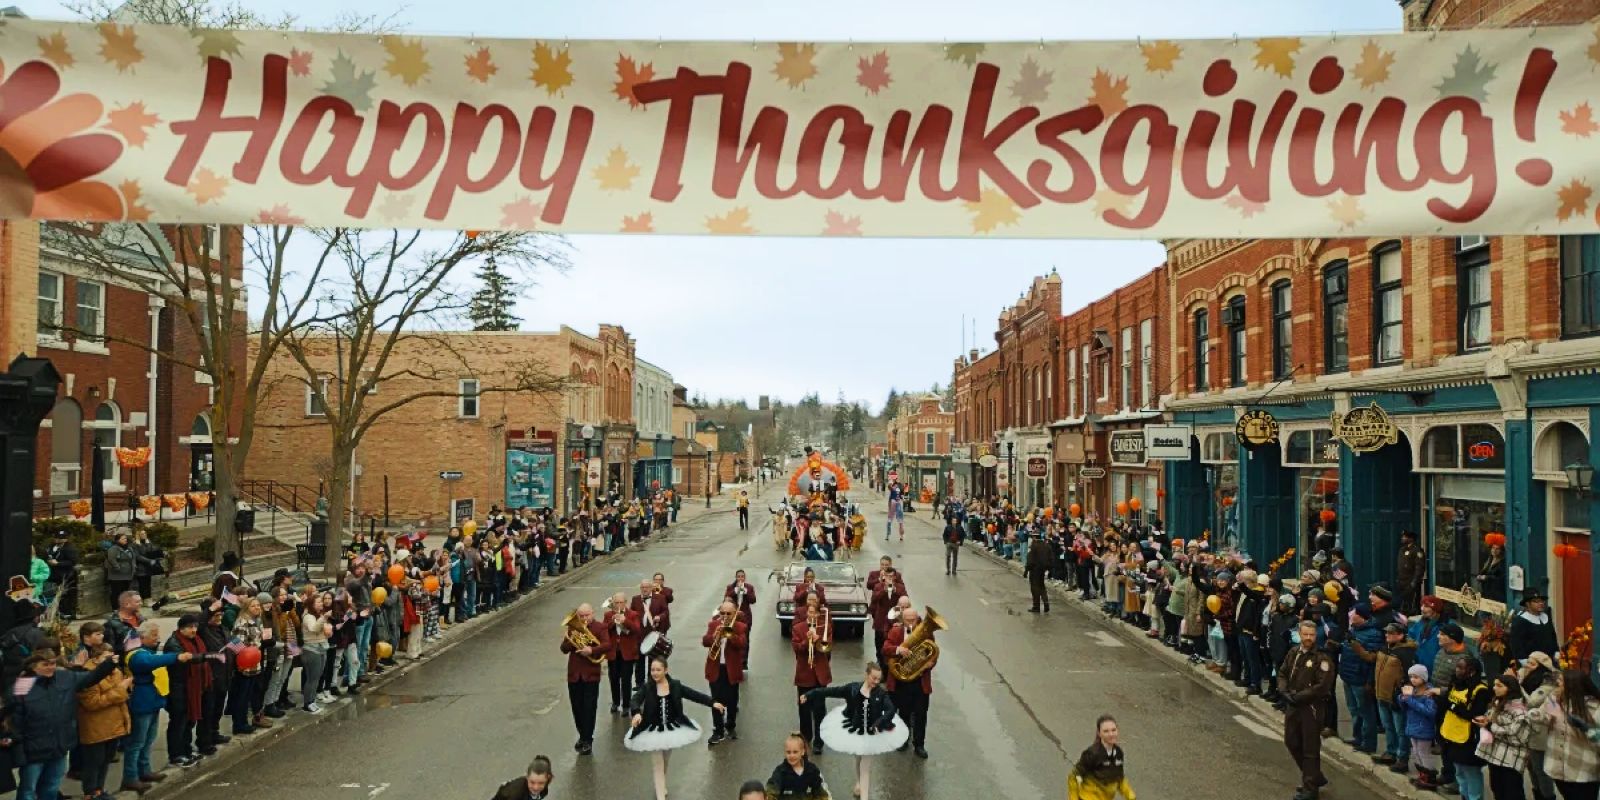 This image shows a Thanksgiving parade with people watching from the sidewalks.